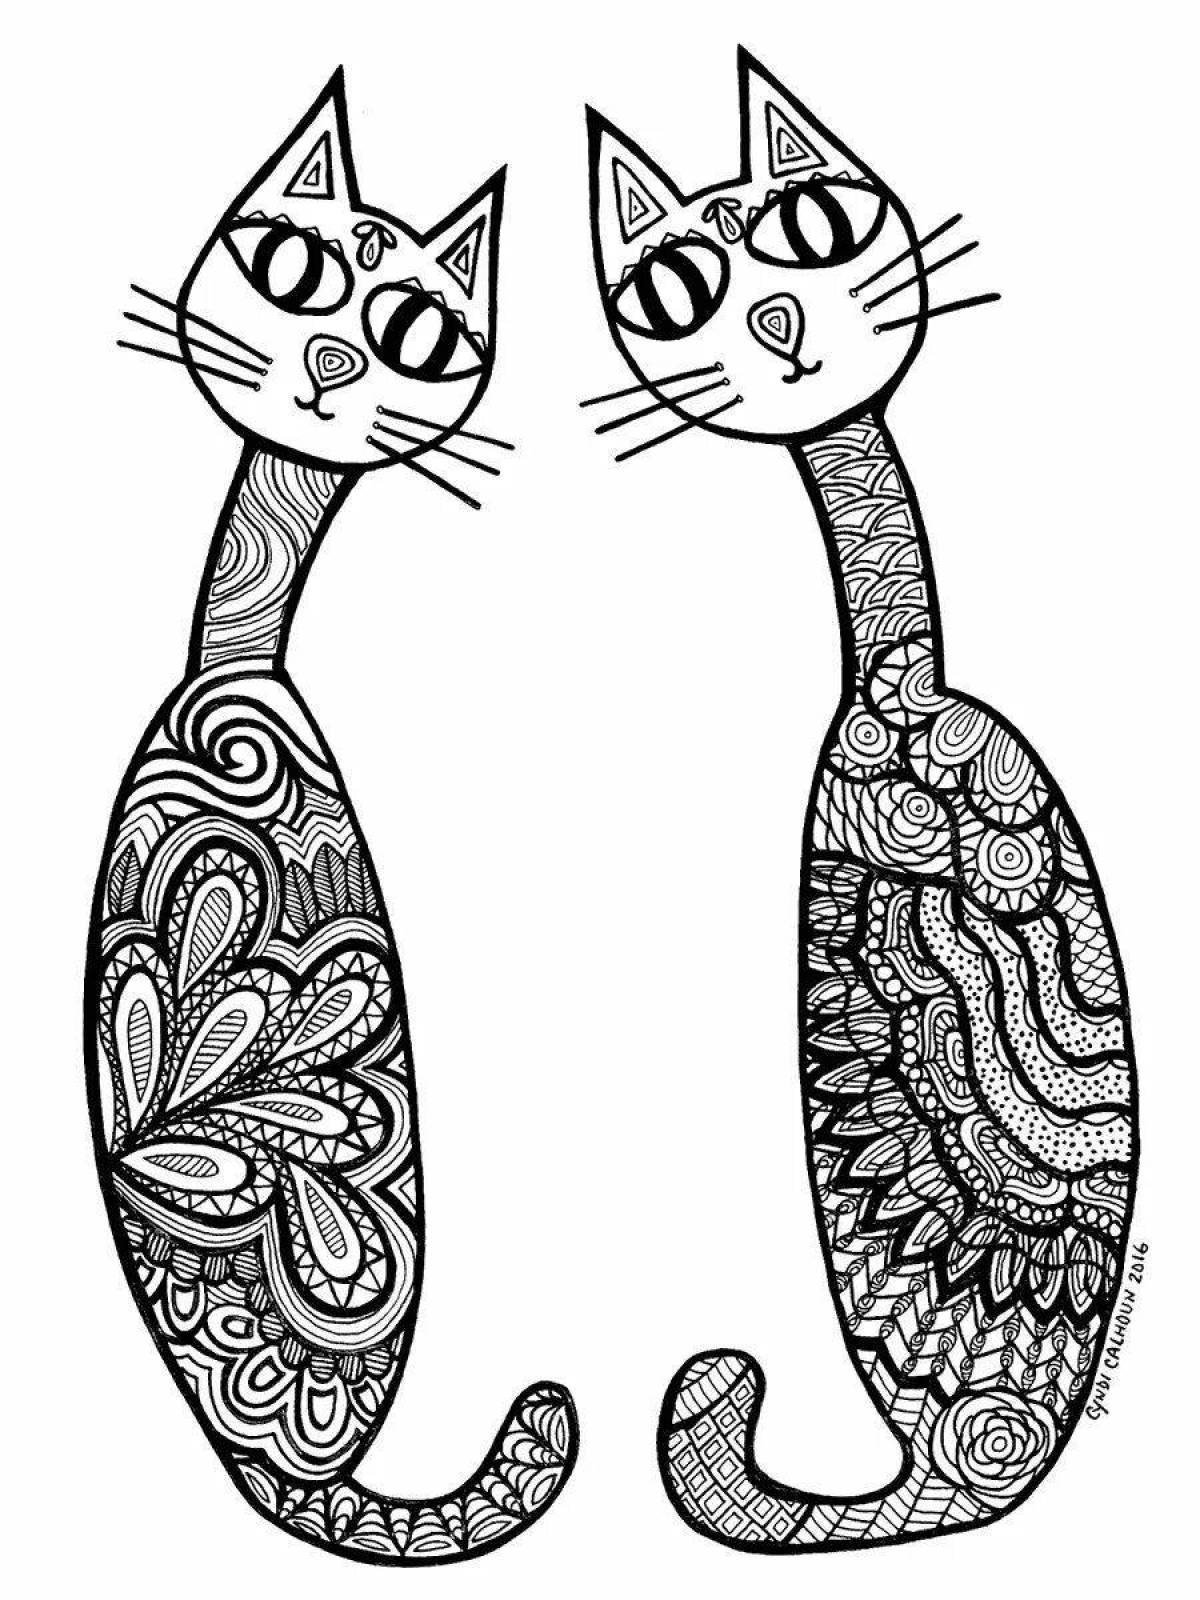 Coloring book bright patterned cat